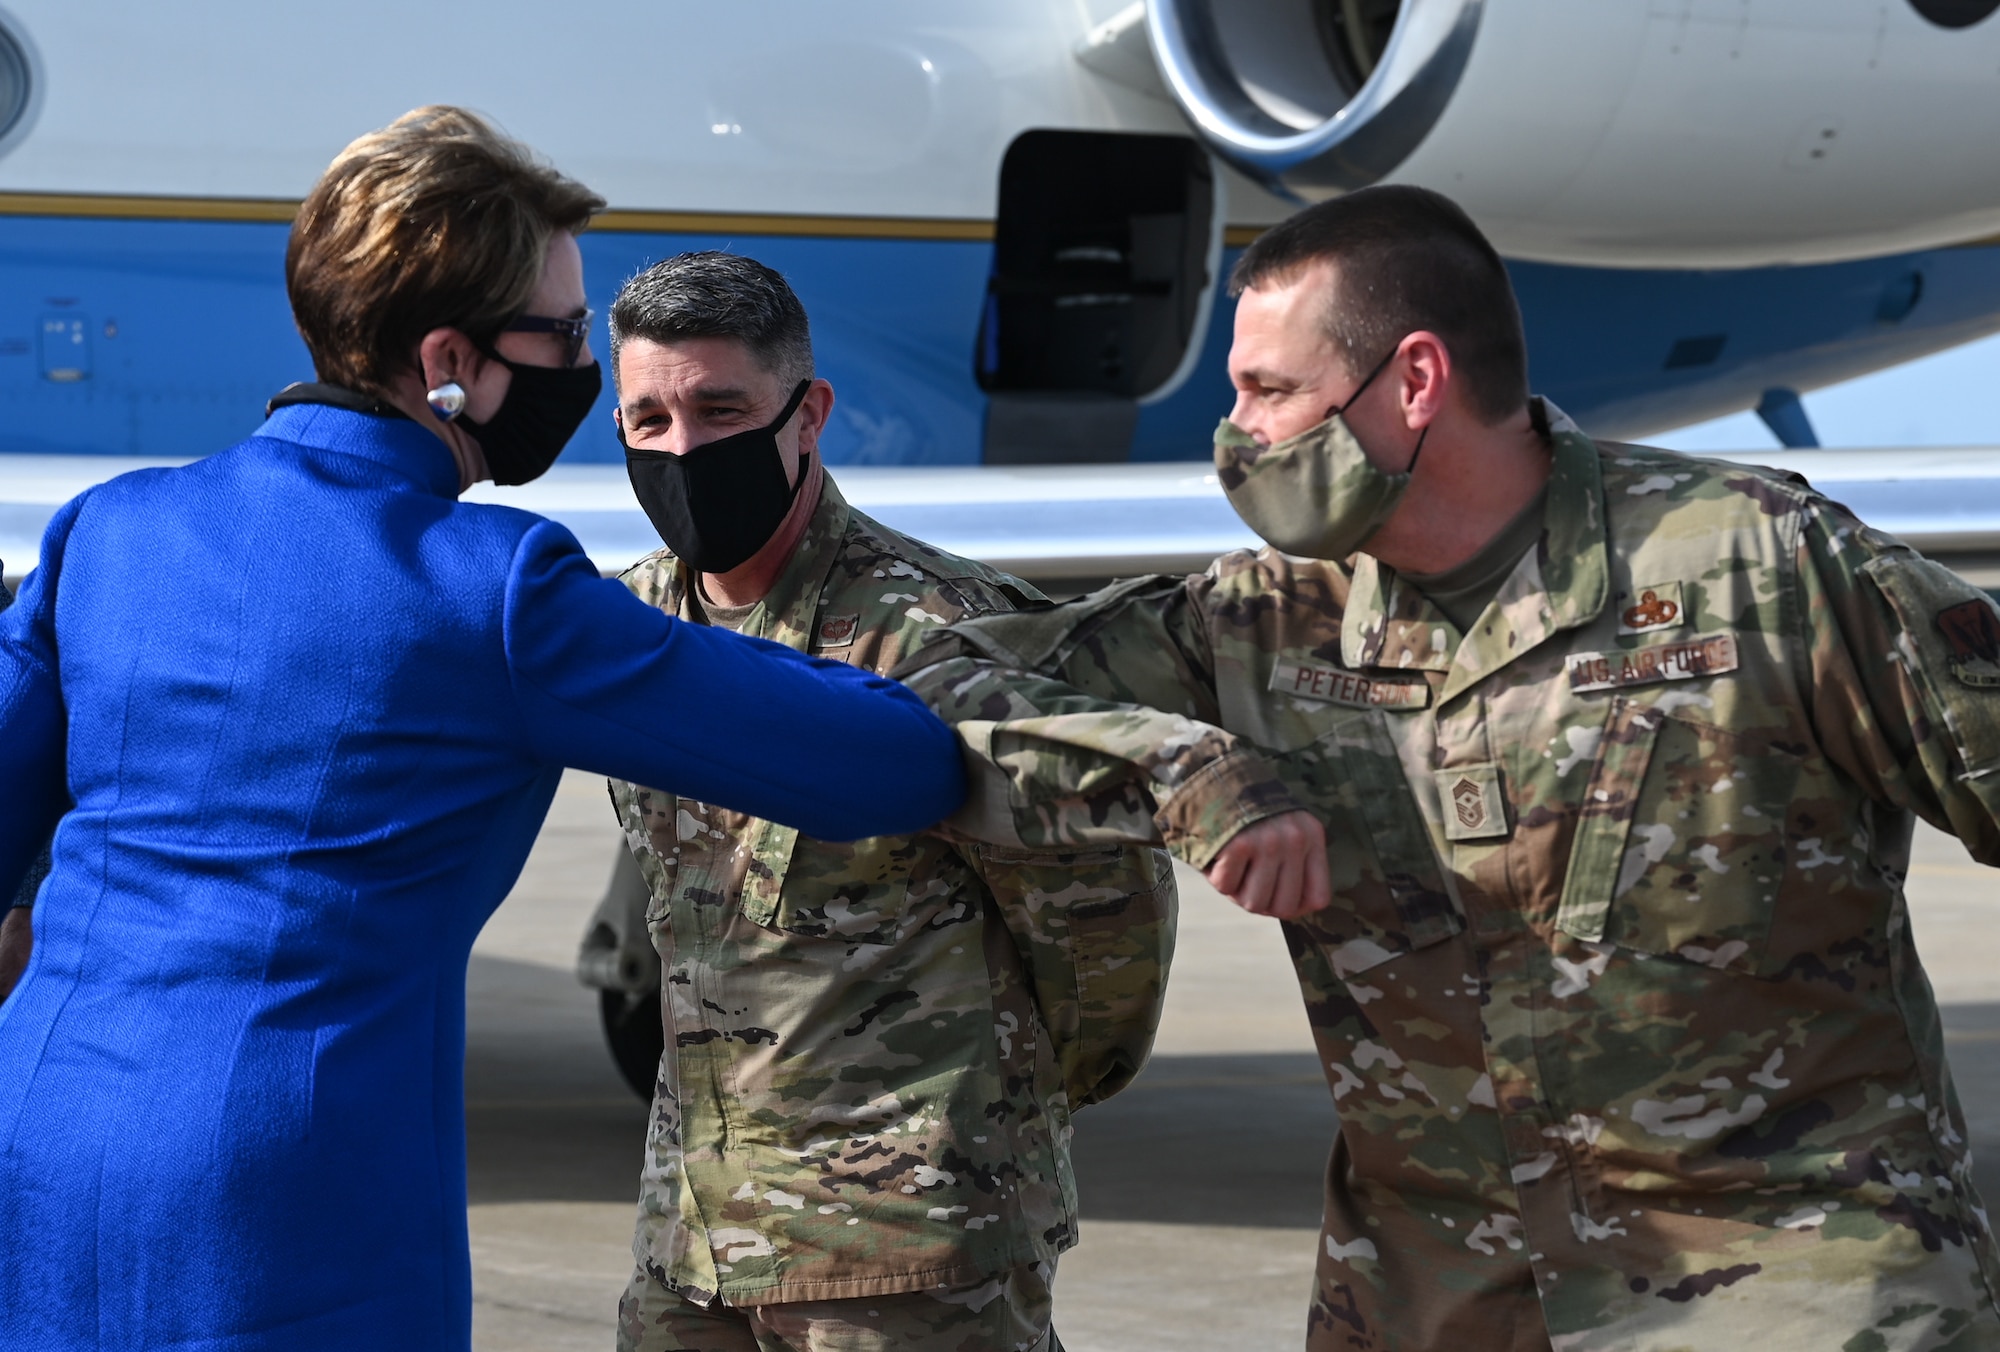 Secretary of the Air Force Barbara M. Barrett is greeted by U.S. Air Force Col. Col. Clinton Ross, 633rd Air Base Wing commander, and Chief Master Sgt. Gregory Peterson, 633 ABW command chief, at Joint Base Langley-Eustis, Virginia, July 16, 2020. Barrett toured the 1st Fighter Wing, the 363rd Intelligence, Surveillance and Reconnaissance Wing and the 480th ISRW. (U.S. Air Force photo by Airman 1st Class Sarah Dowe)